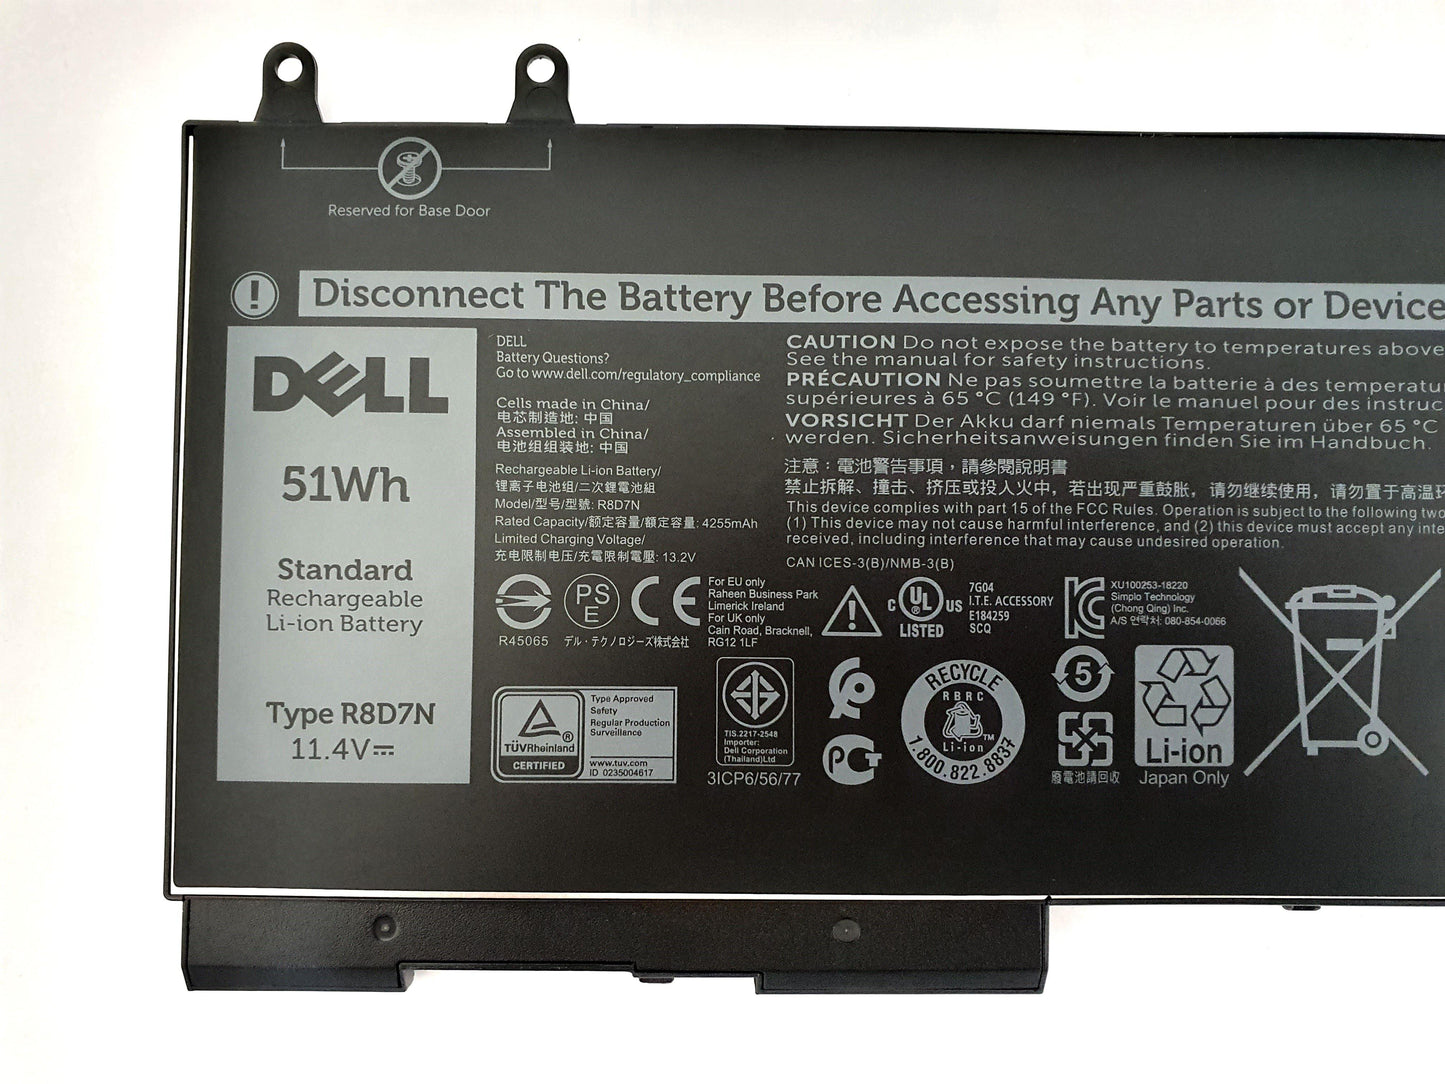 Dell Latitude 5400 5401 5411 Laptop Battery 4 Cell 51Wh R8D7N W8GMW | Black Cat PC